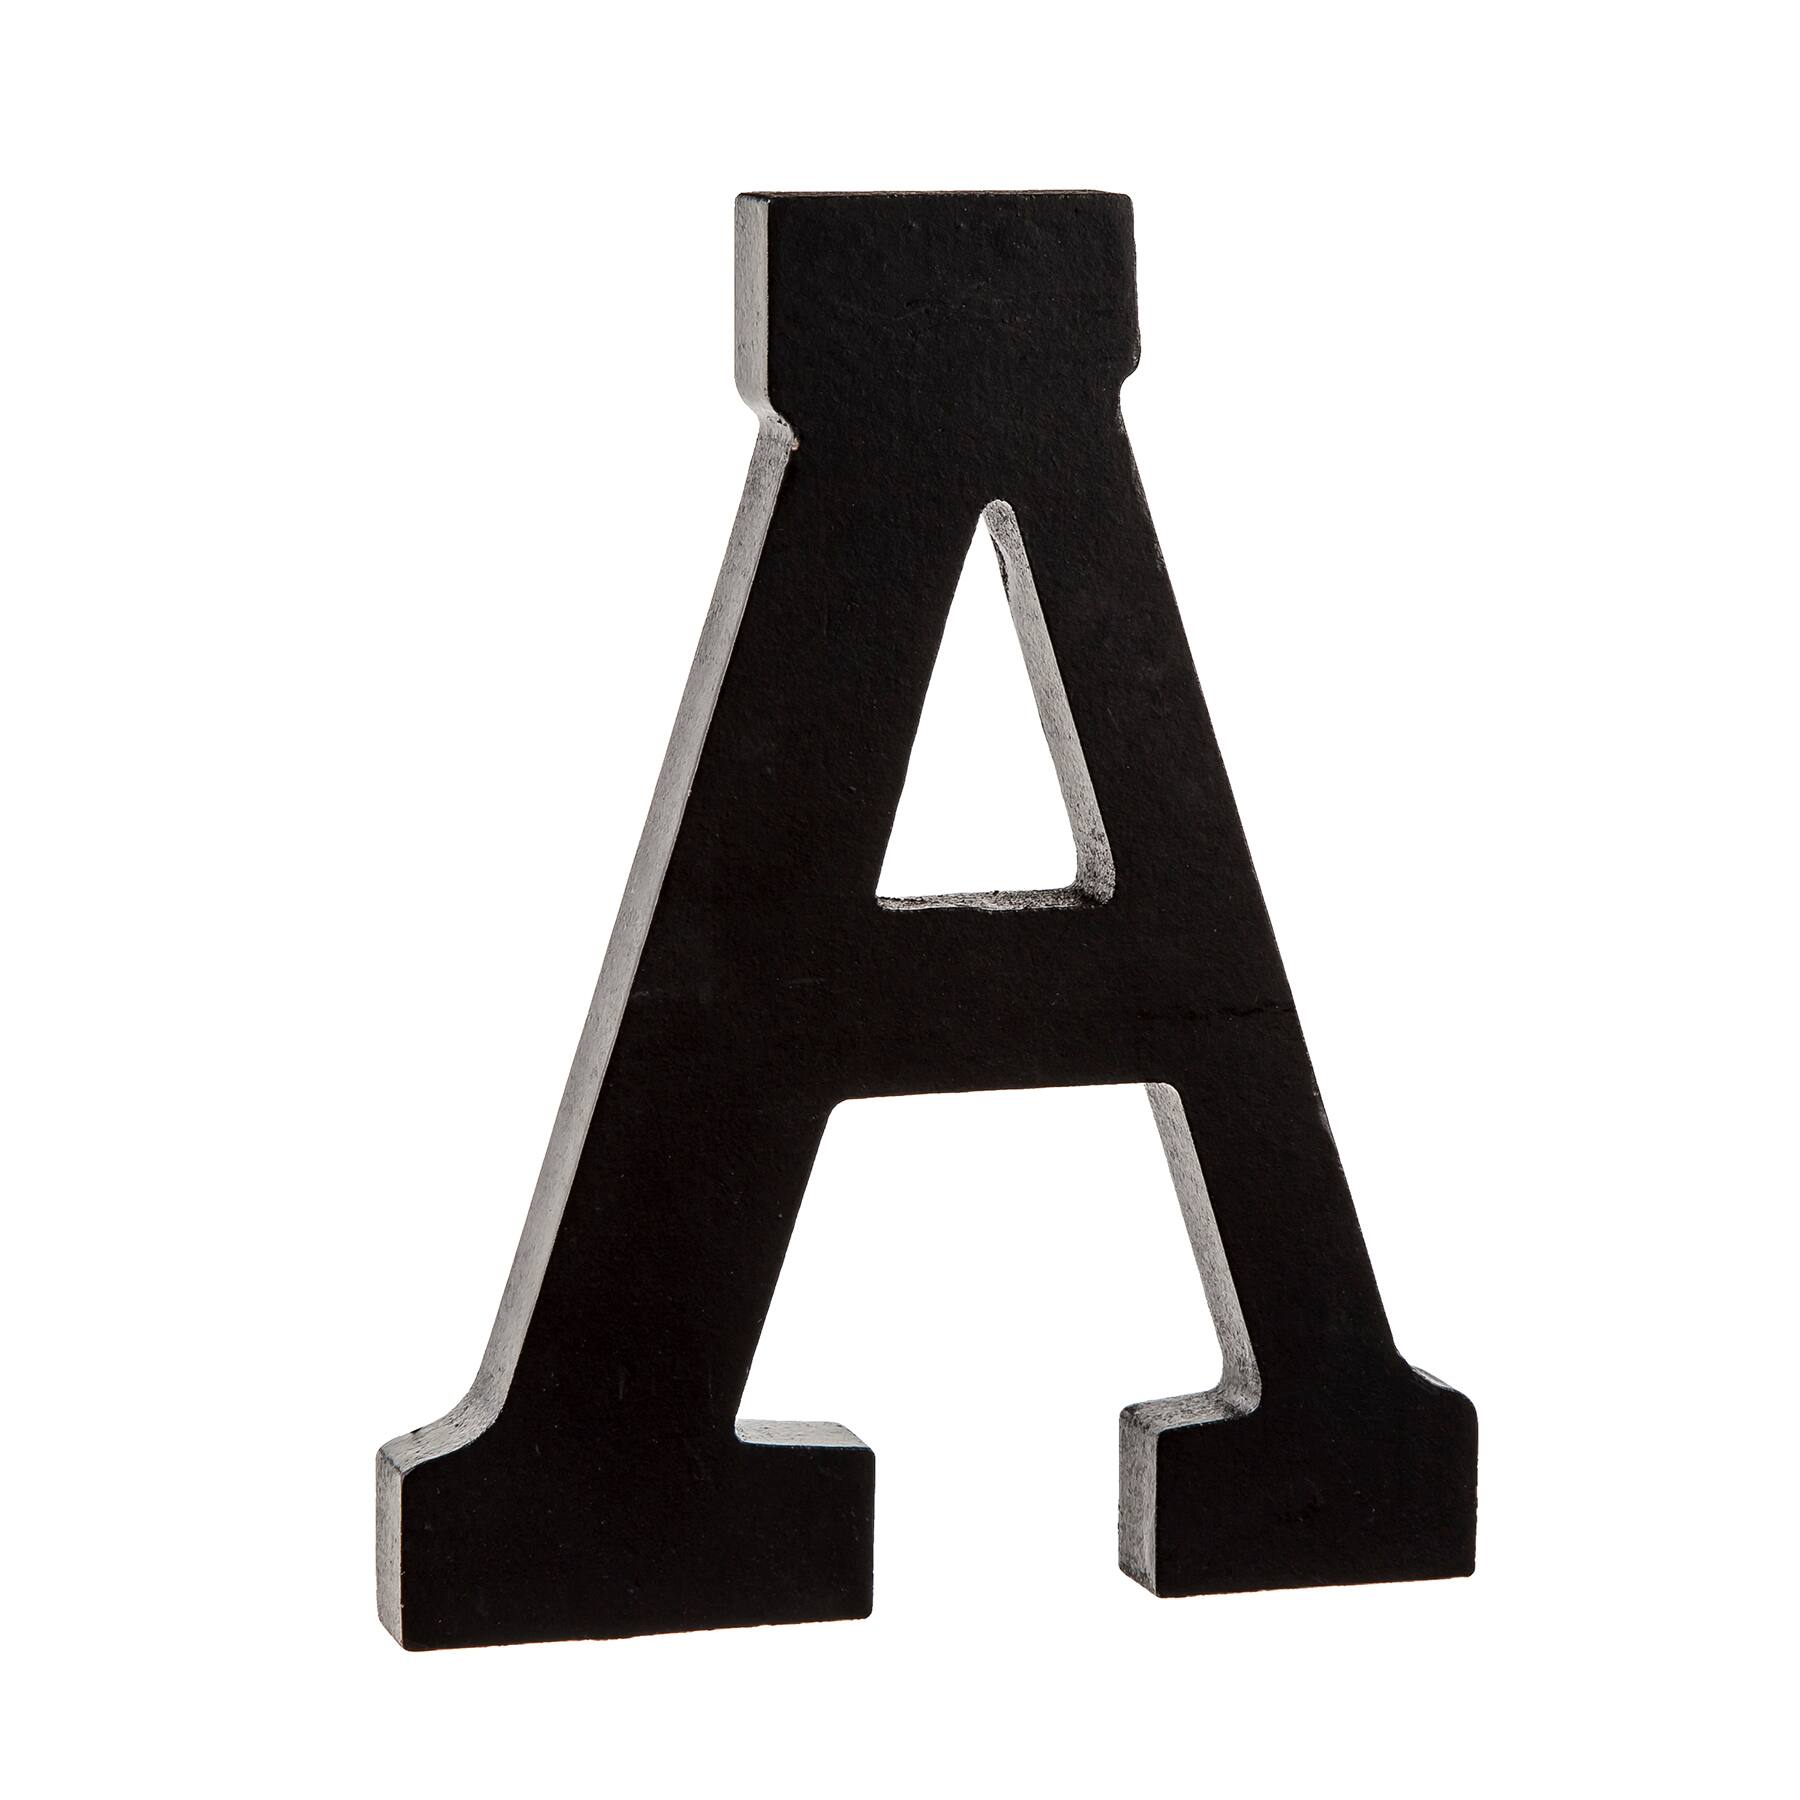 Shop for the 7"" Black Wooden Letter by ArtMinds® at Michaels